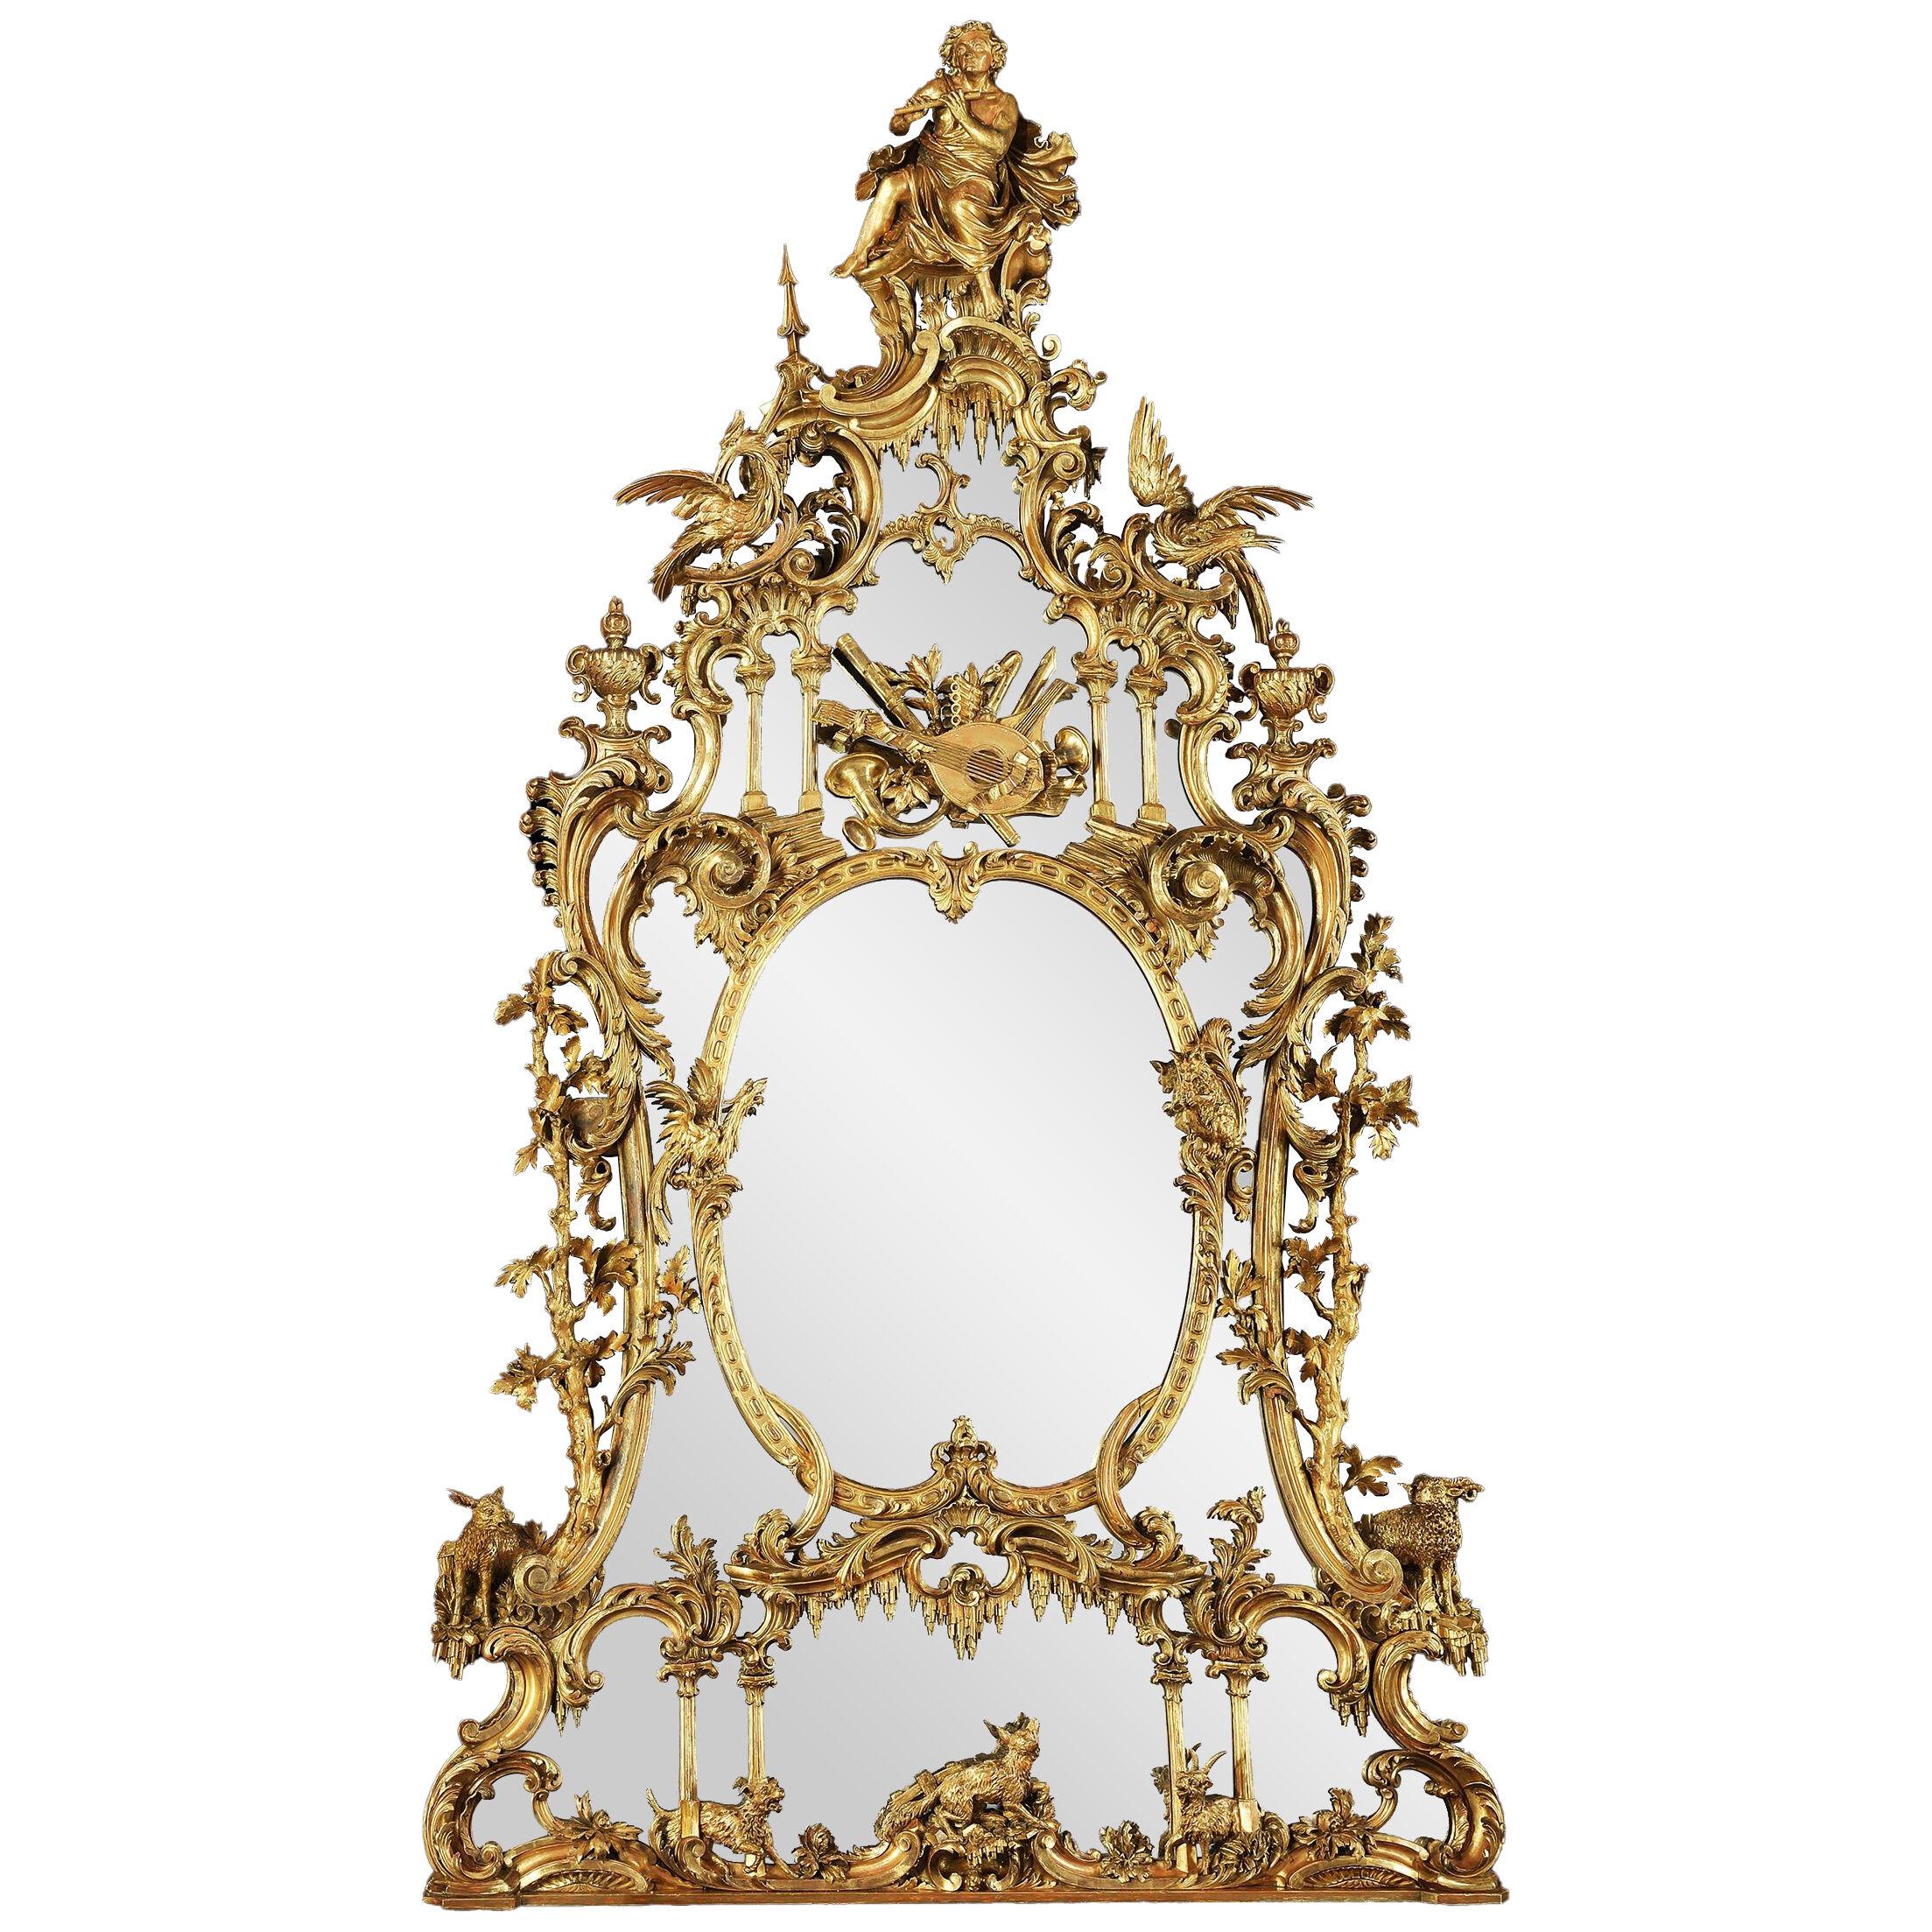  19th Century George III Style Carved Mirror after a design by Thomas Johnson